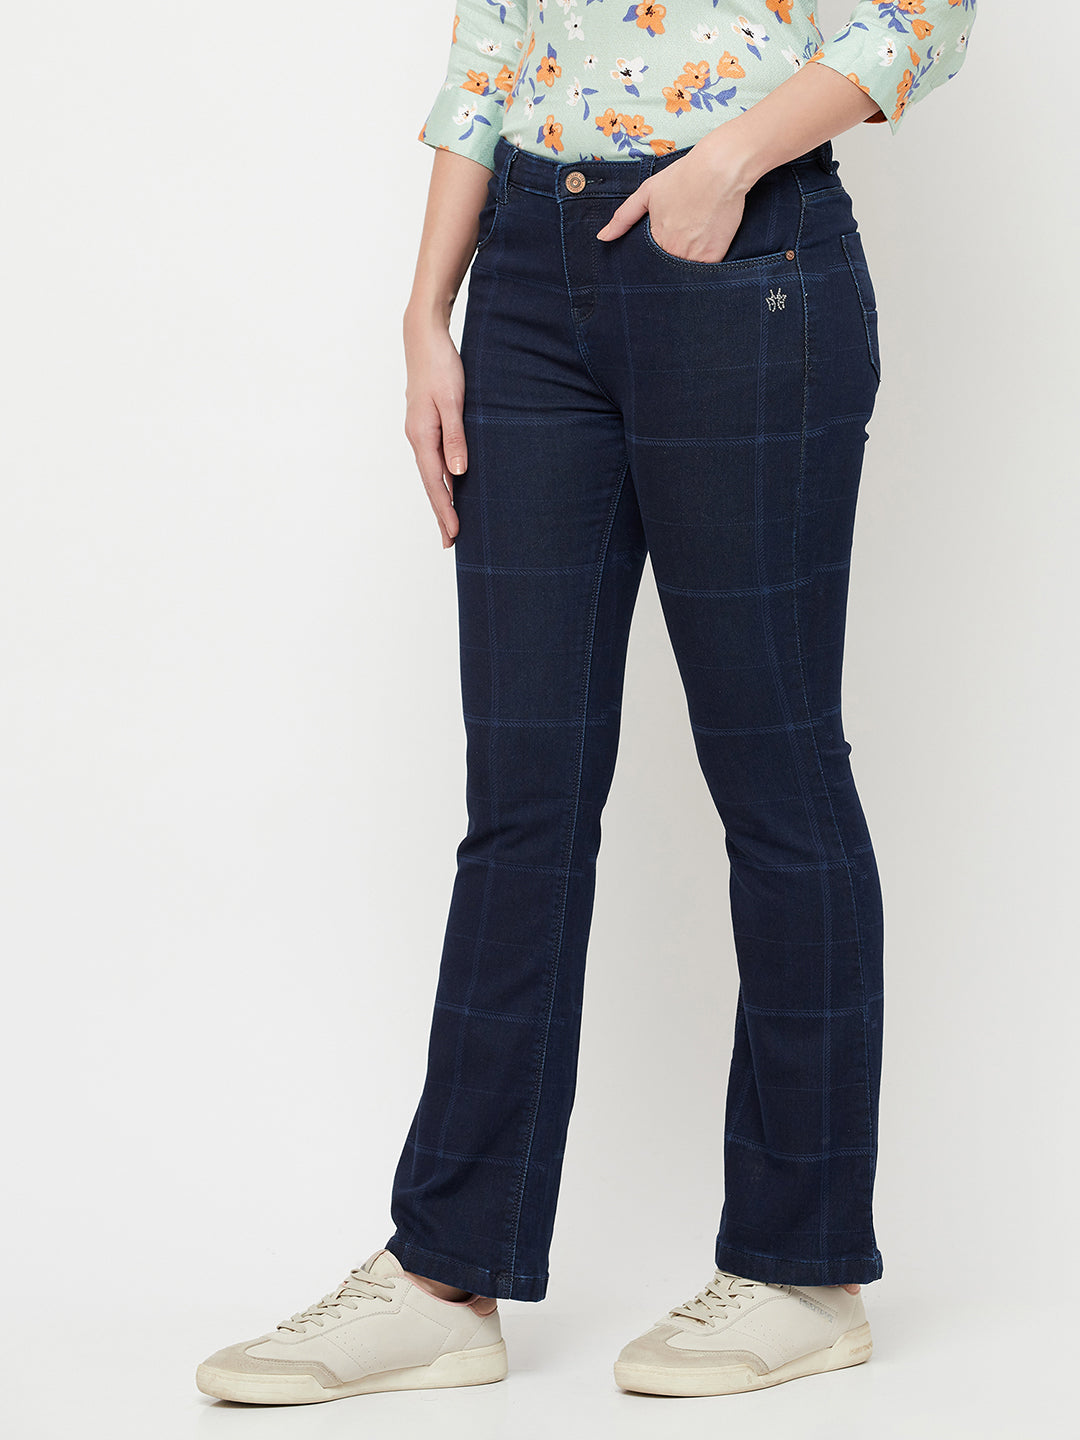 Navy Blue Checked Boot Cut Jeans - Women Jeans